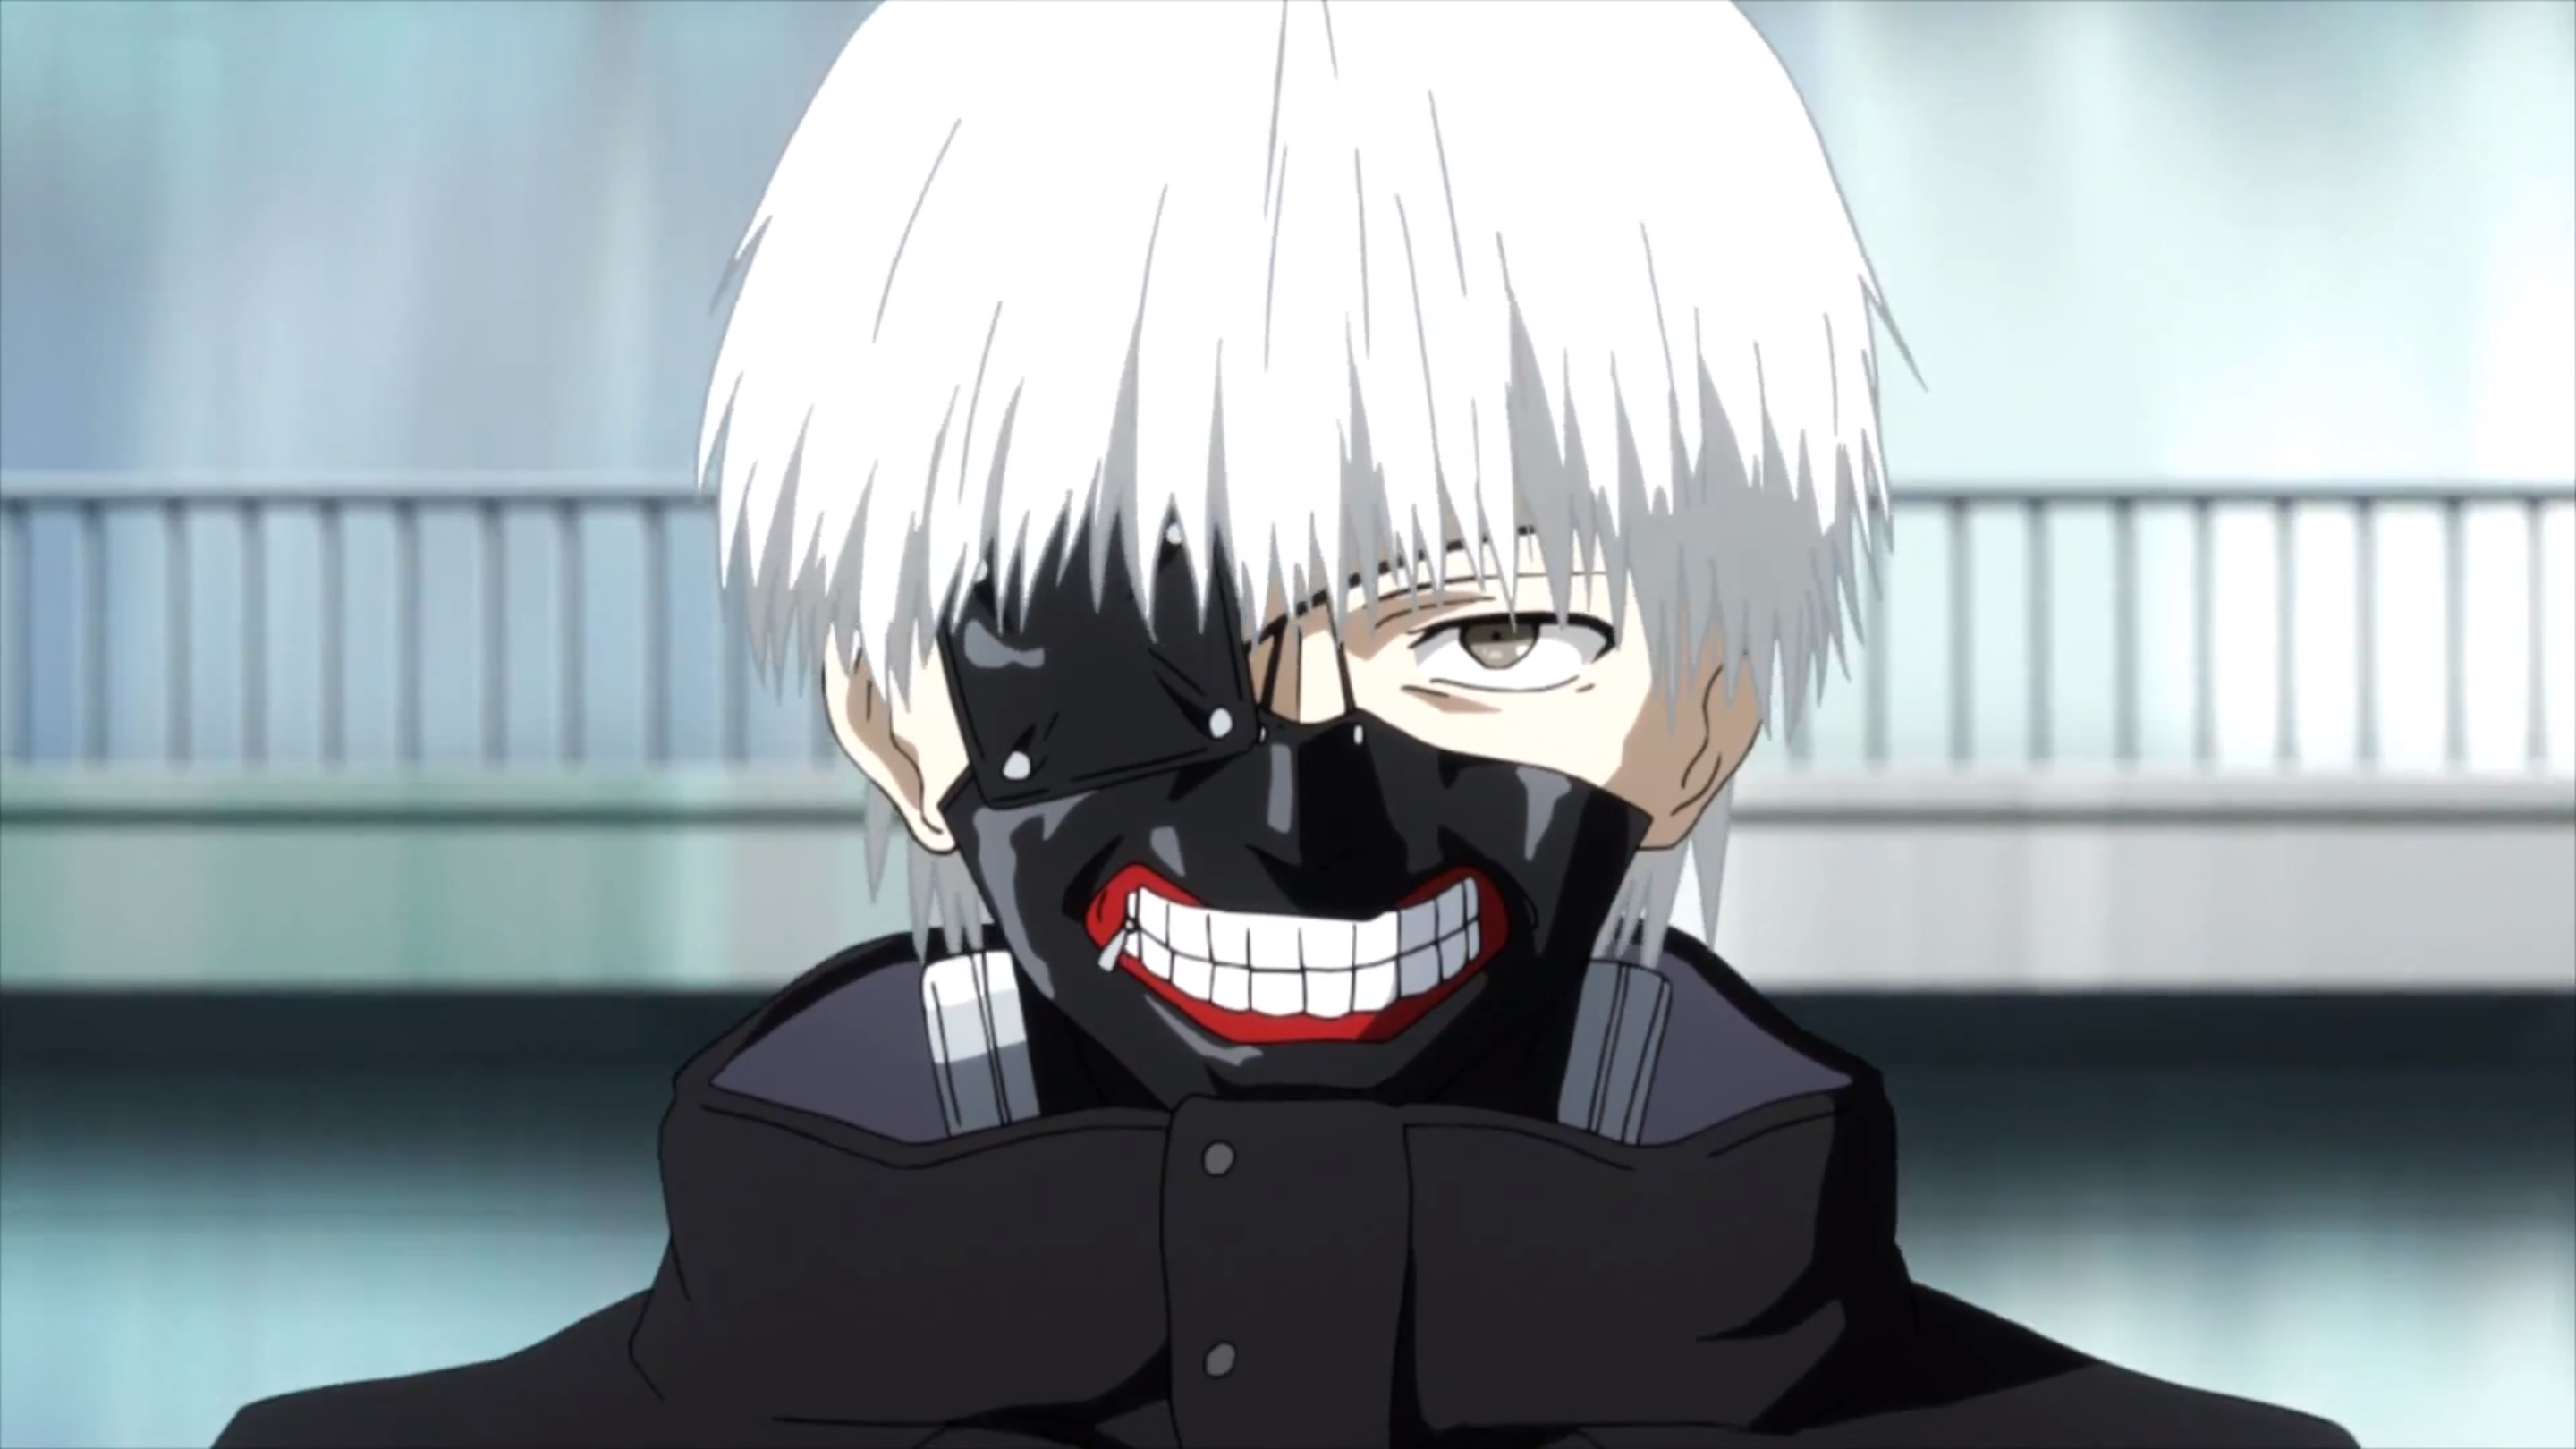 Anime Tokyo Ghoul Ken Kaneki Poster | 300 GSM Quality |12x18 Inch Size :  Amazon.in: Home & Kitchen